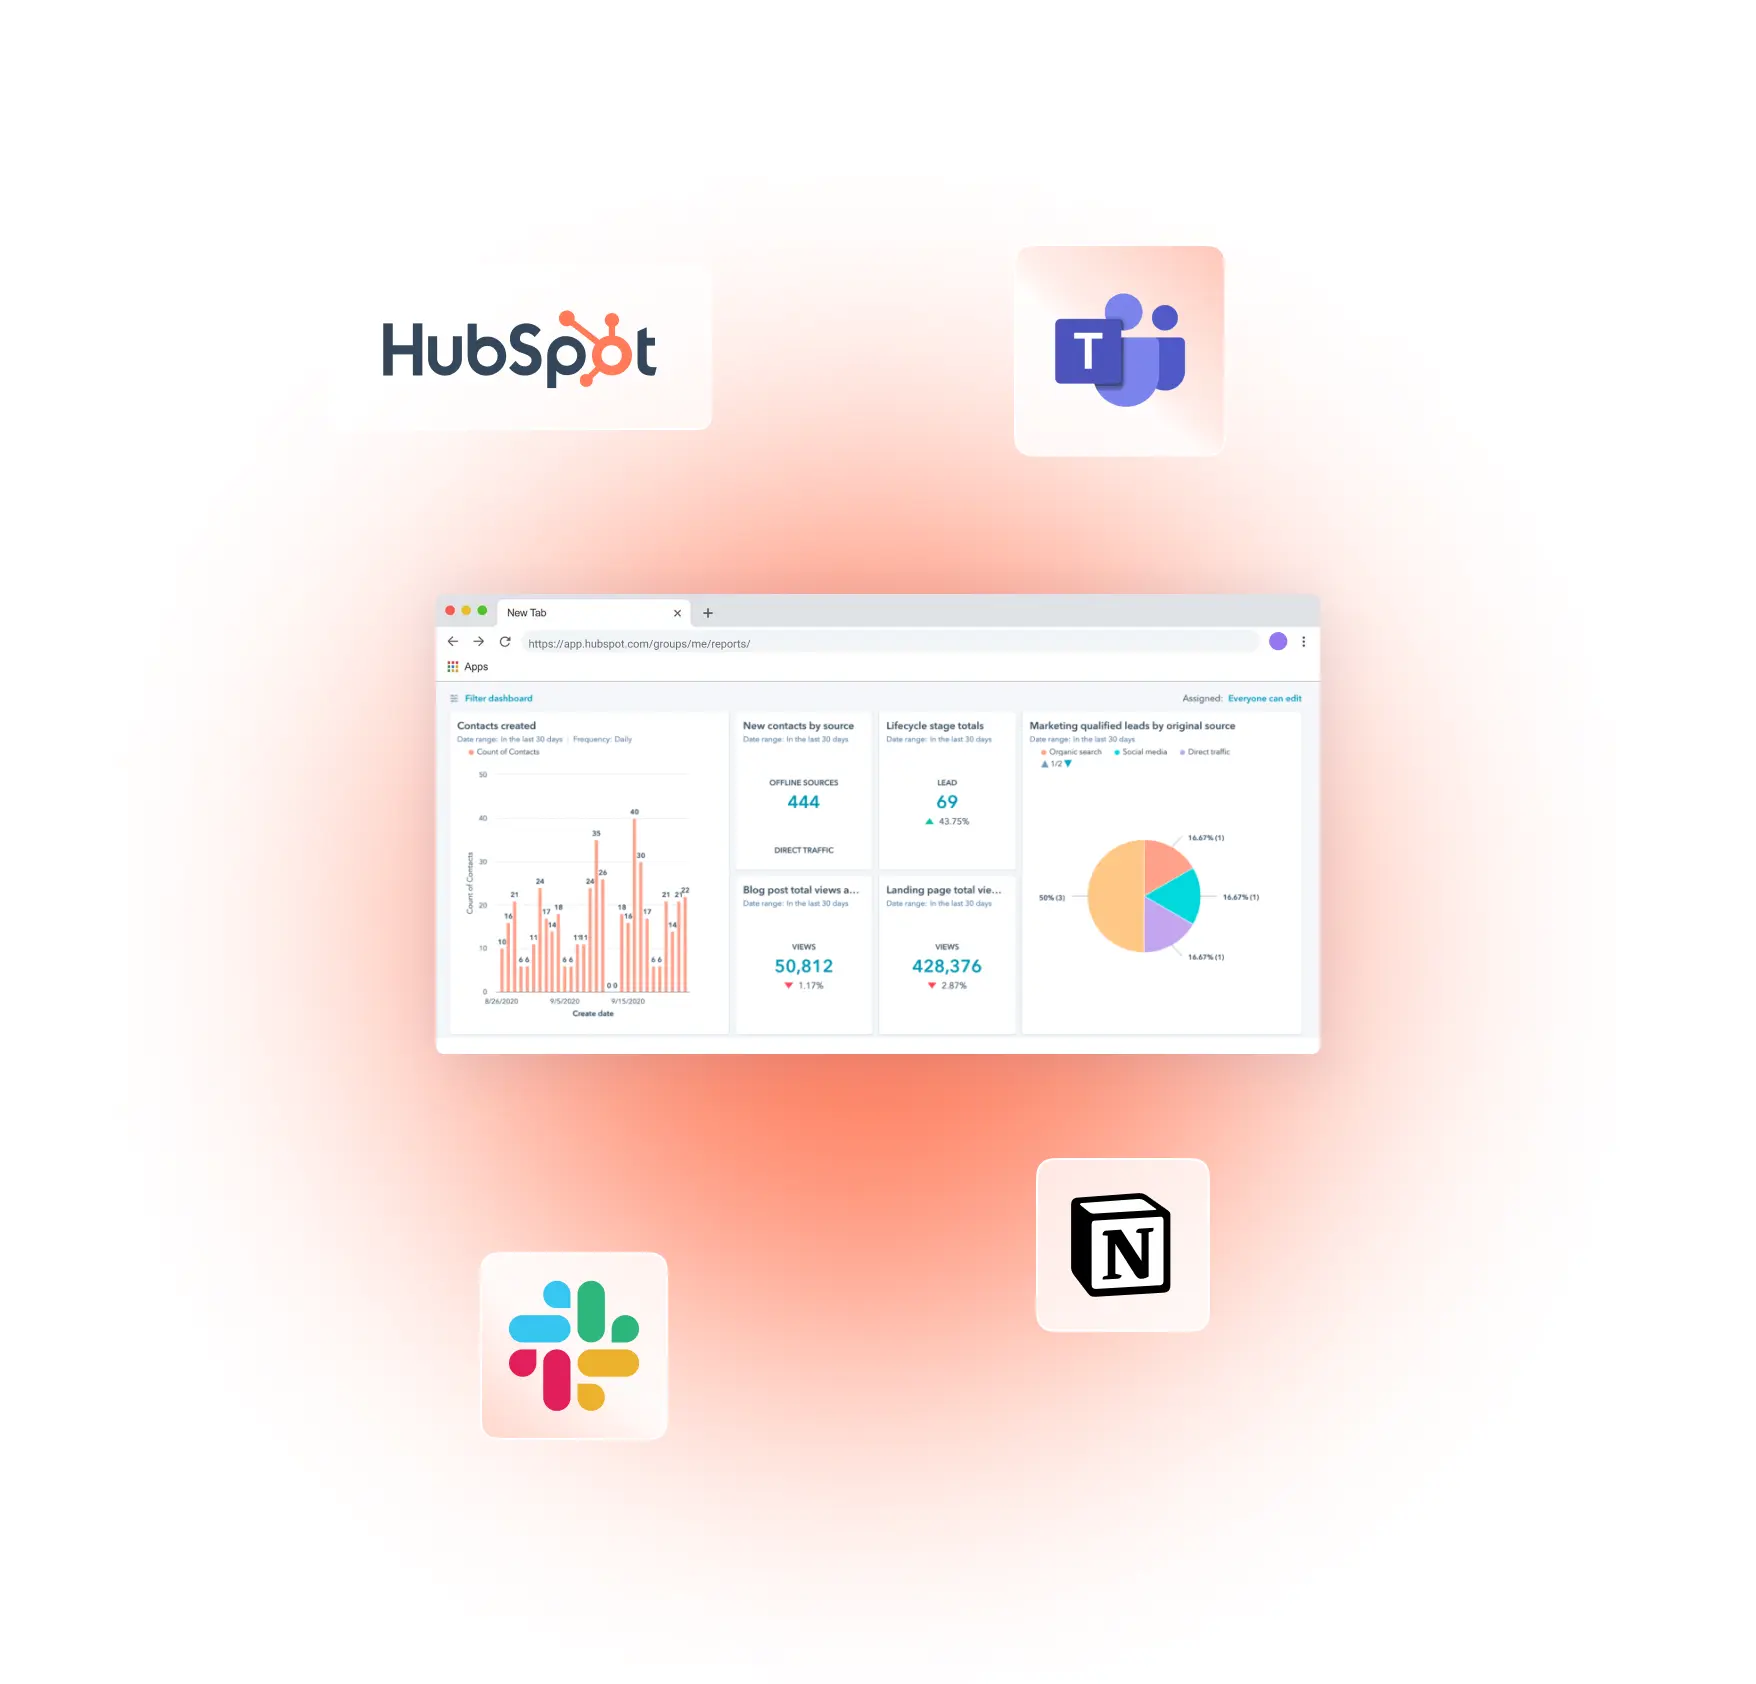 A Hubspot dashboard is open in a browser tab